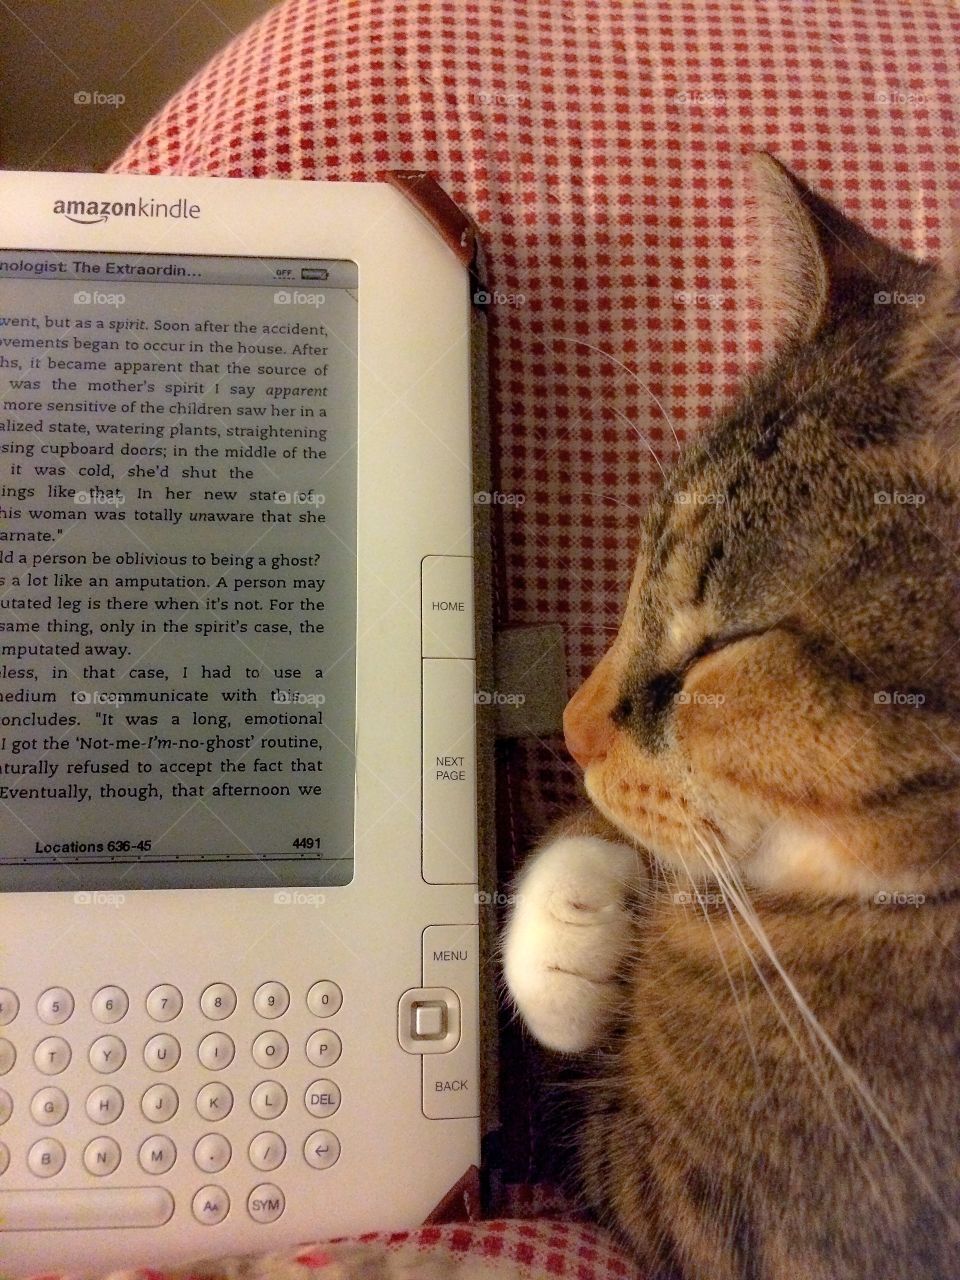 Cat with Kindle